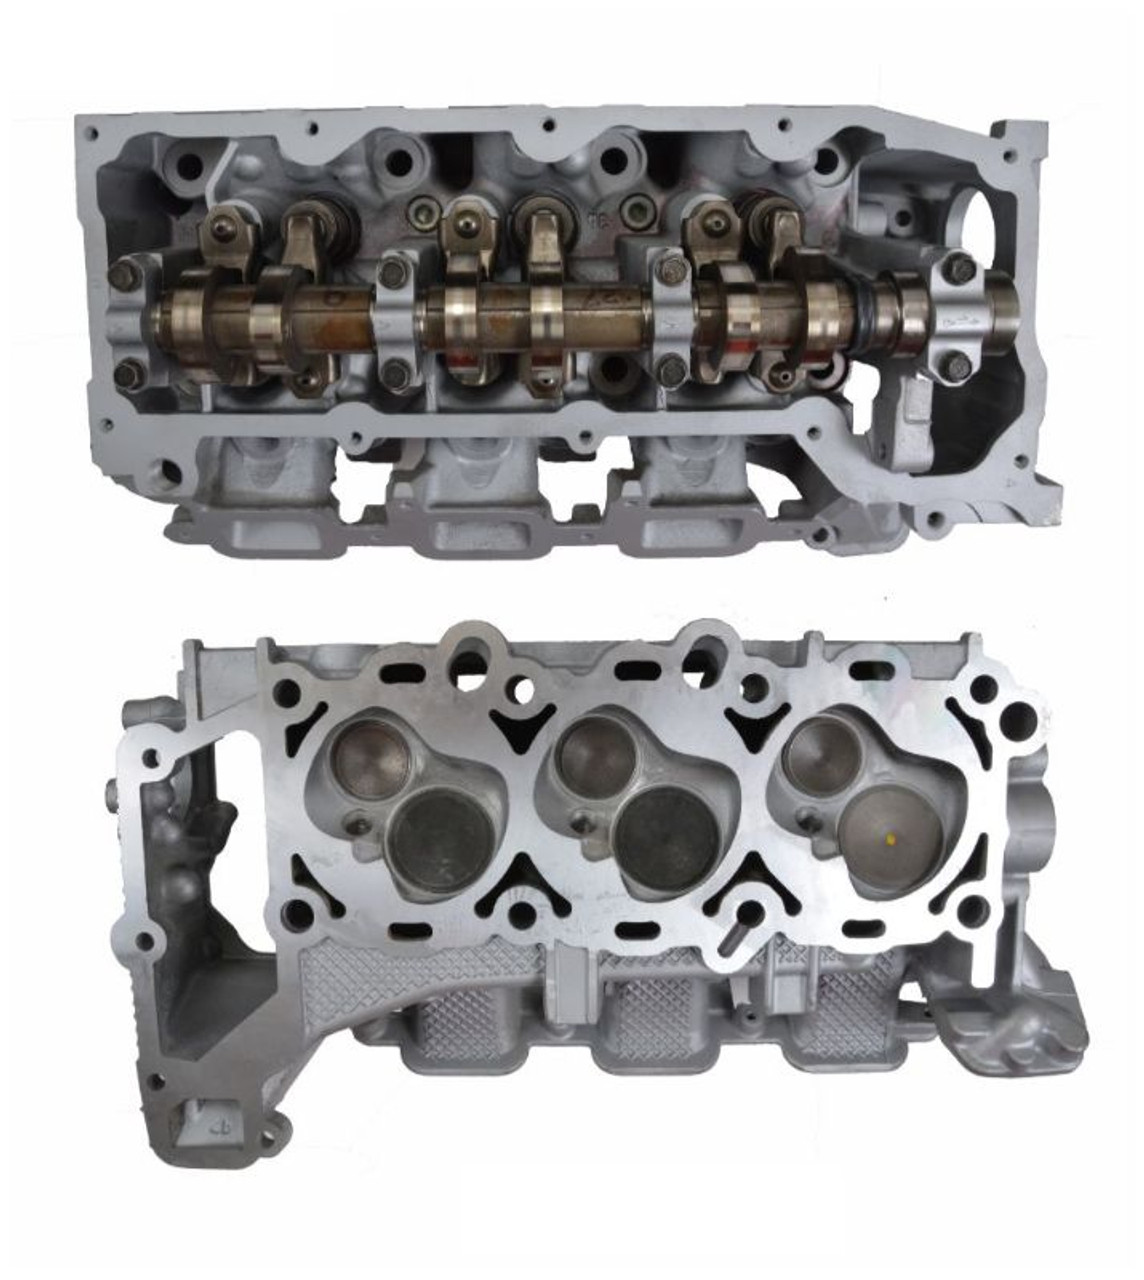 2008 Jeep Grand Cherokee 3.7L Engine Cylinder Head Assembly CH1005R -24